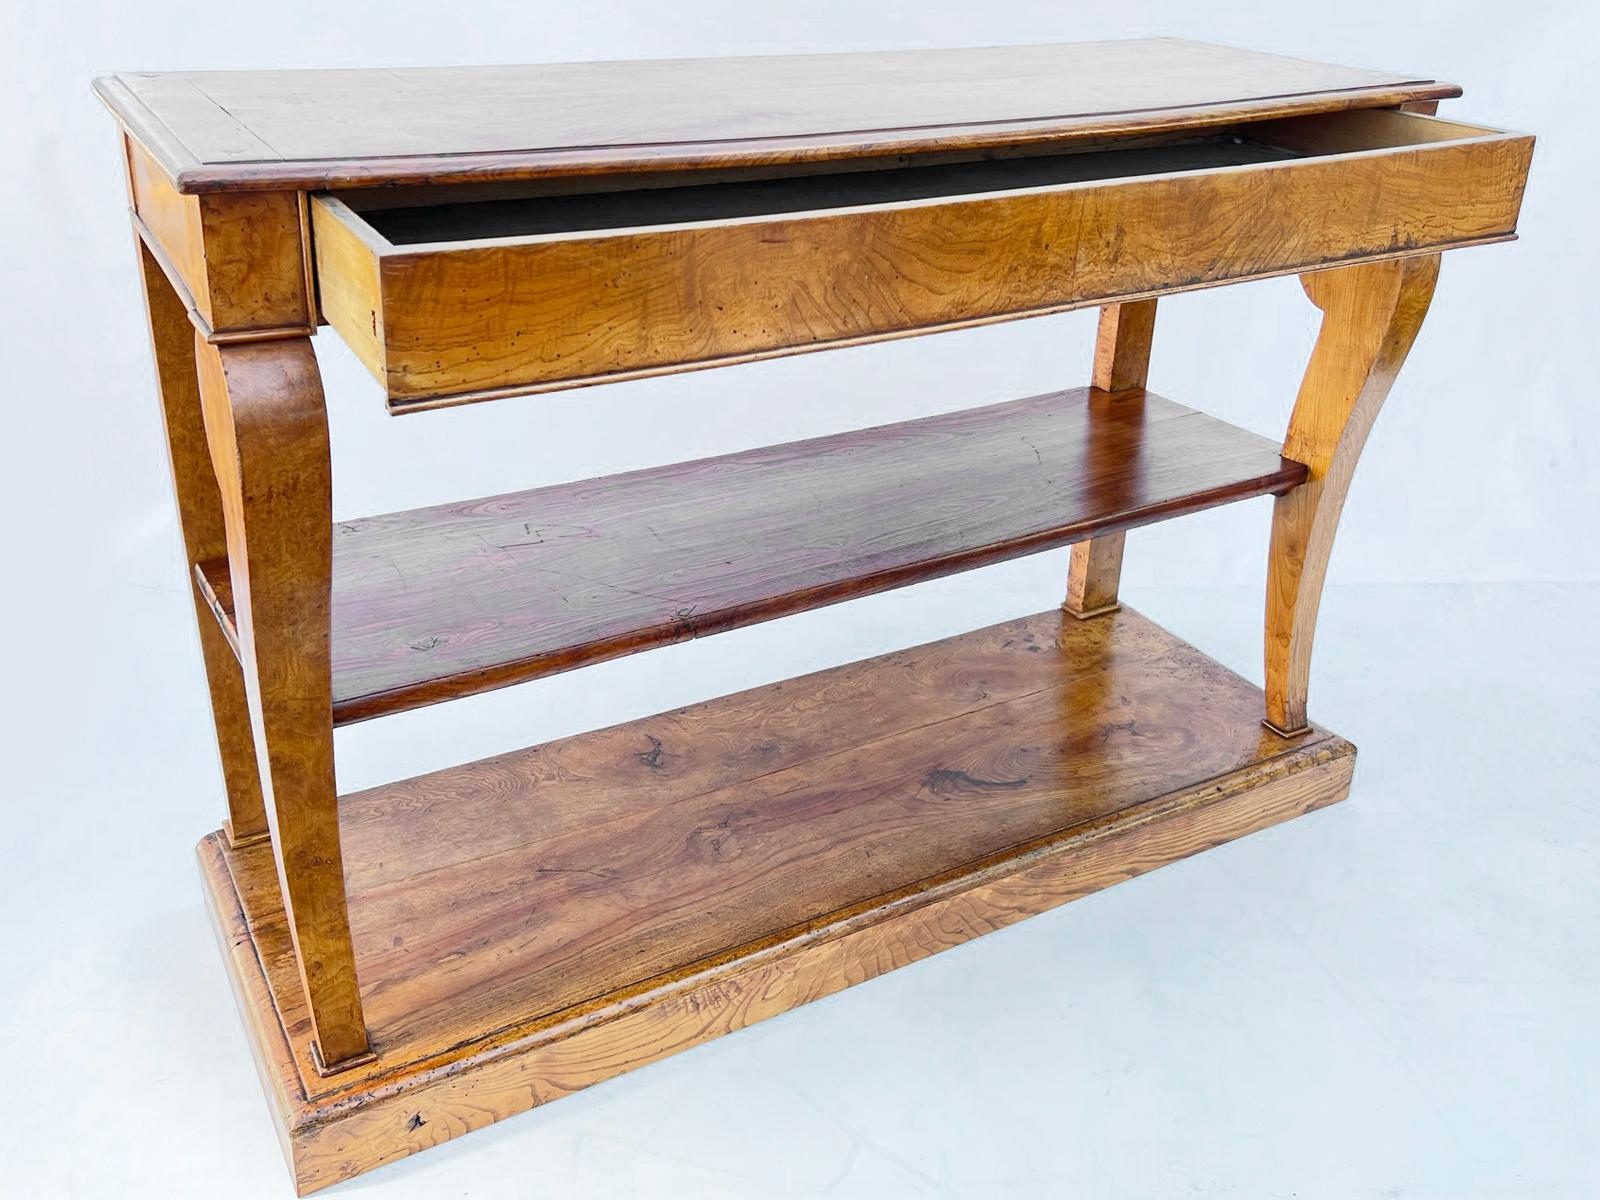 Charles X Mid-19th Century French Empire Console Hall Table